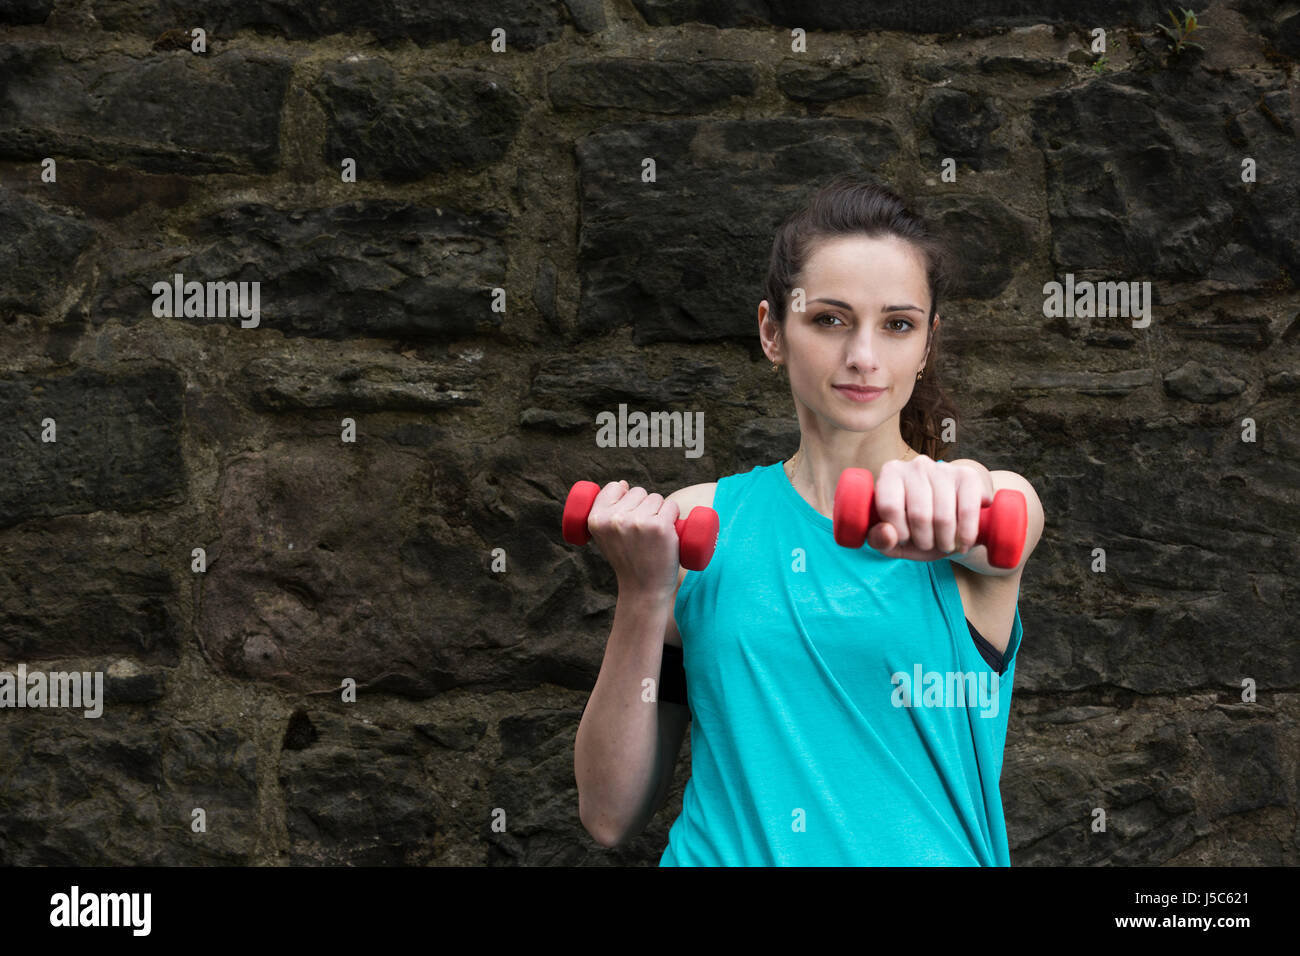 Athletic woman athletic using dumbbells. Action and healthy lifestyle concept. Stock Photo